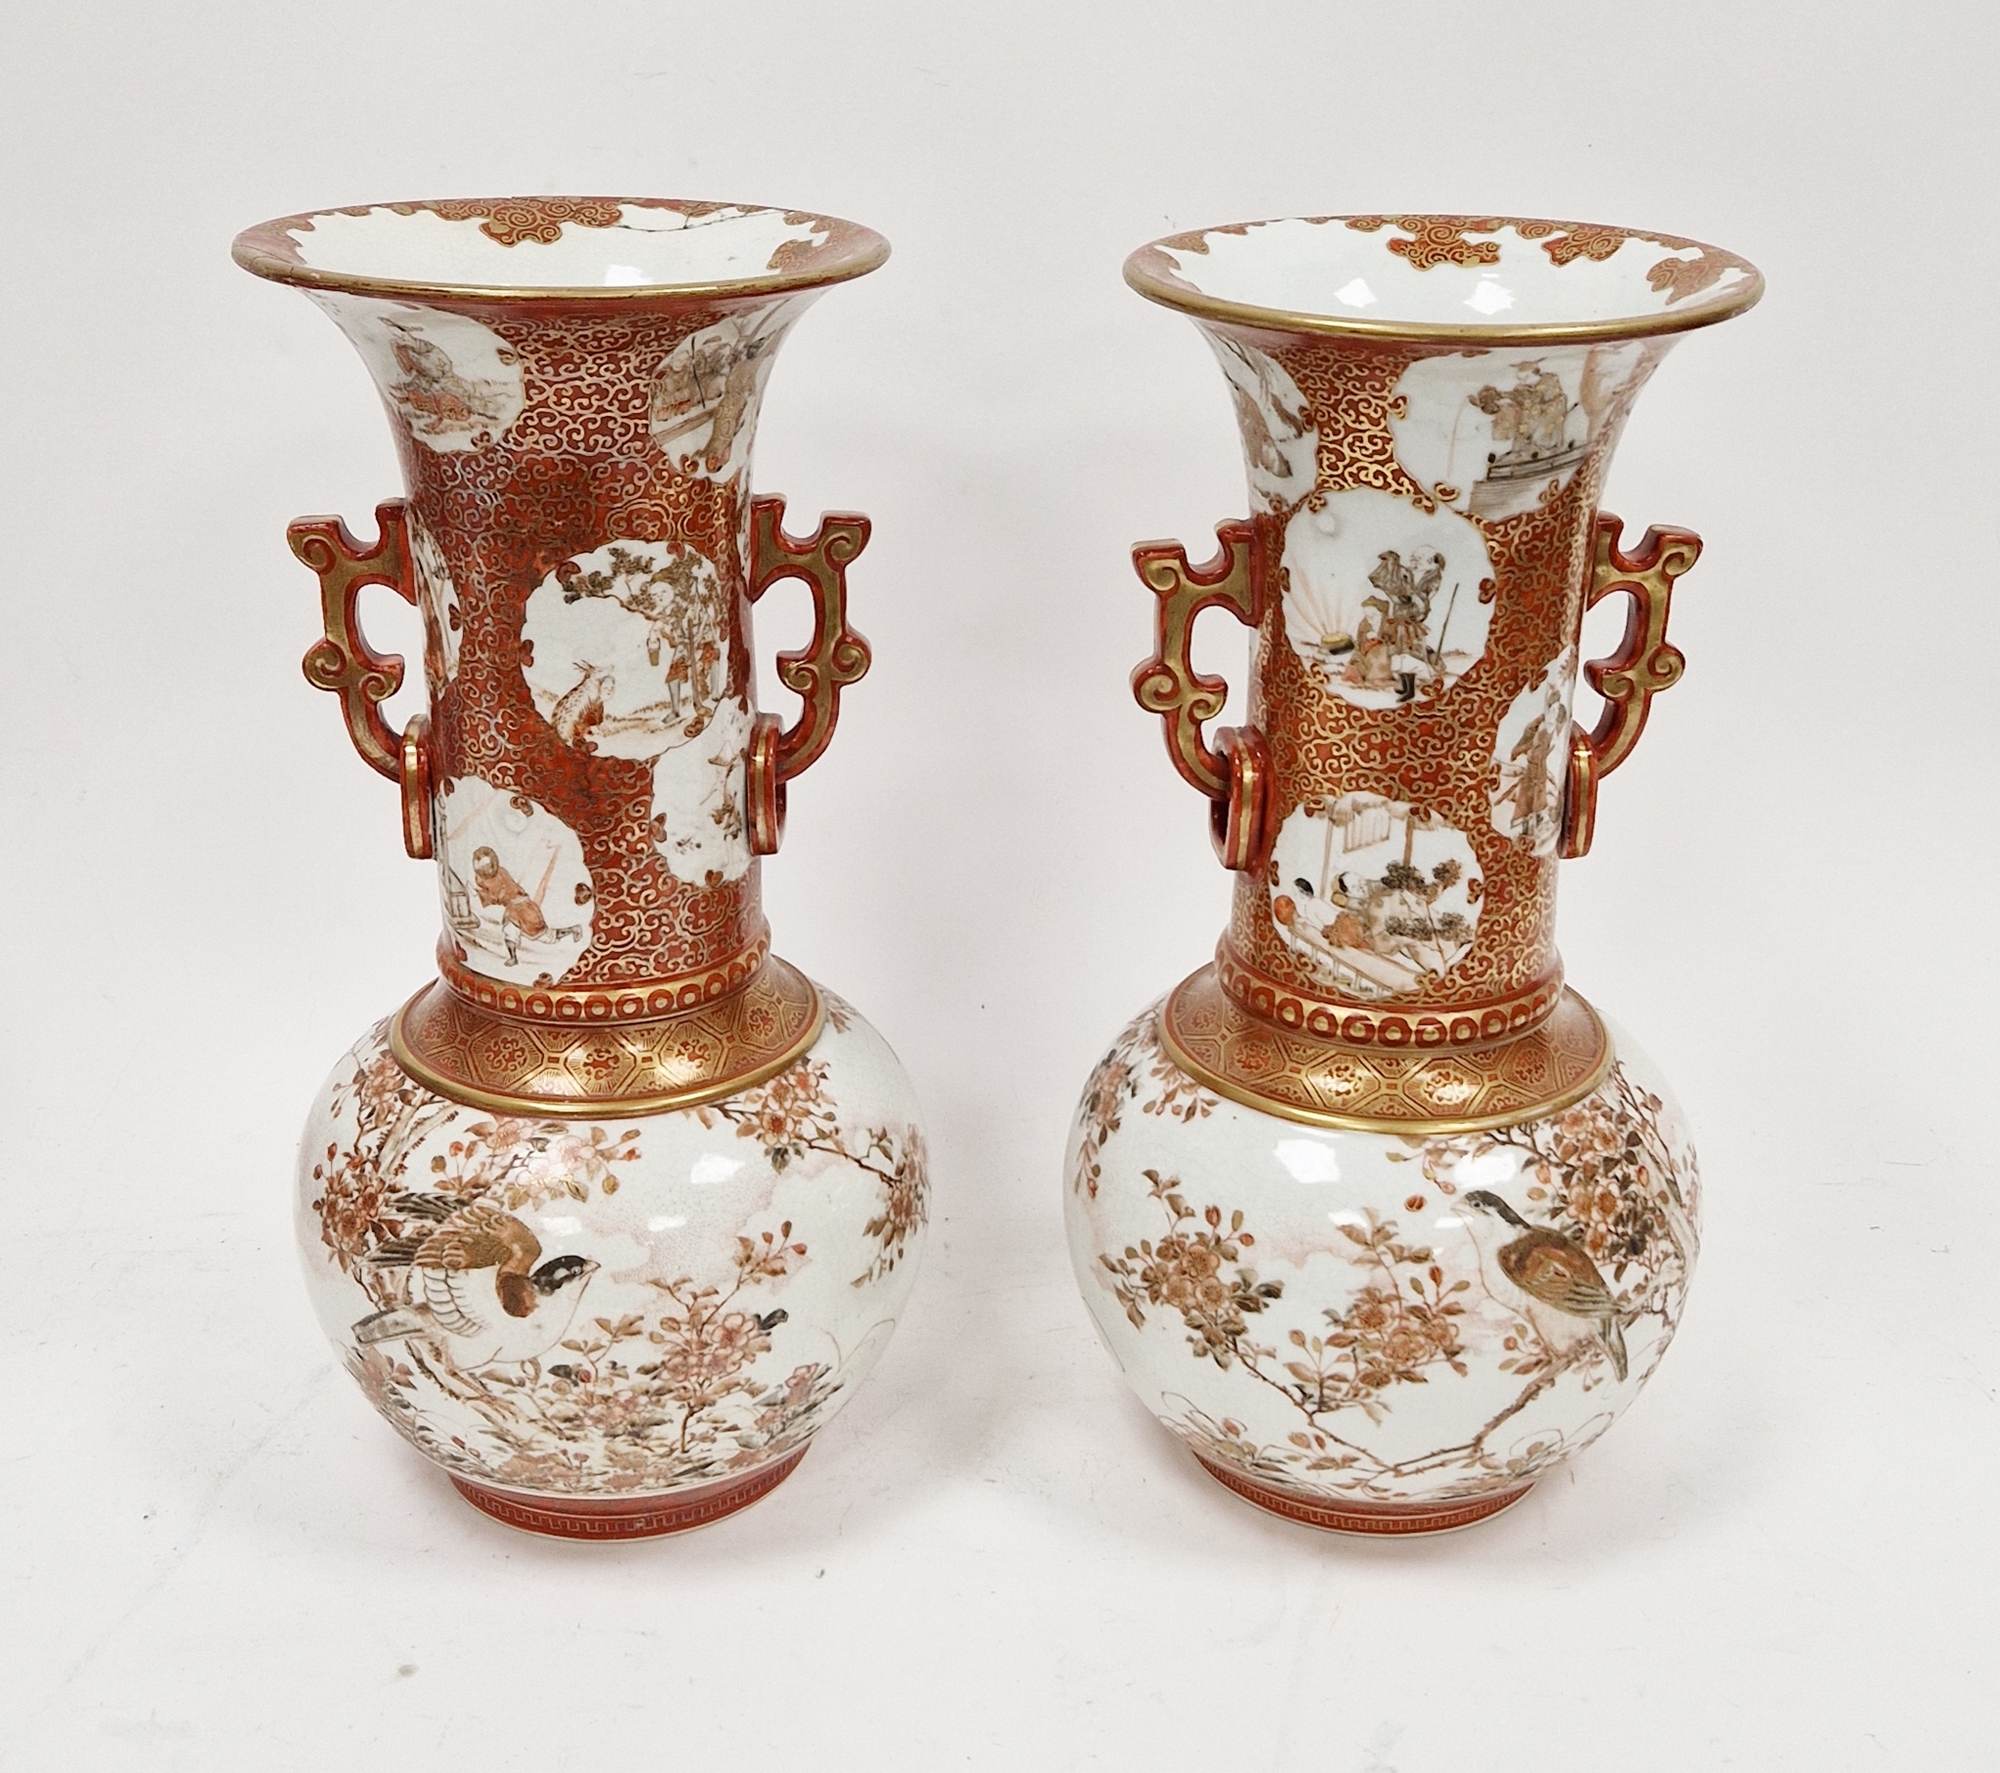 Pair of Japanese Meiji period (1868-1912) Satsuma vases, iron red character marks to base, each